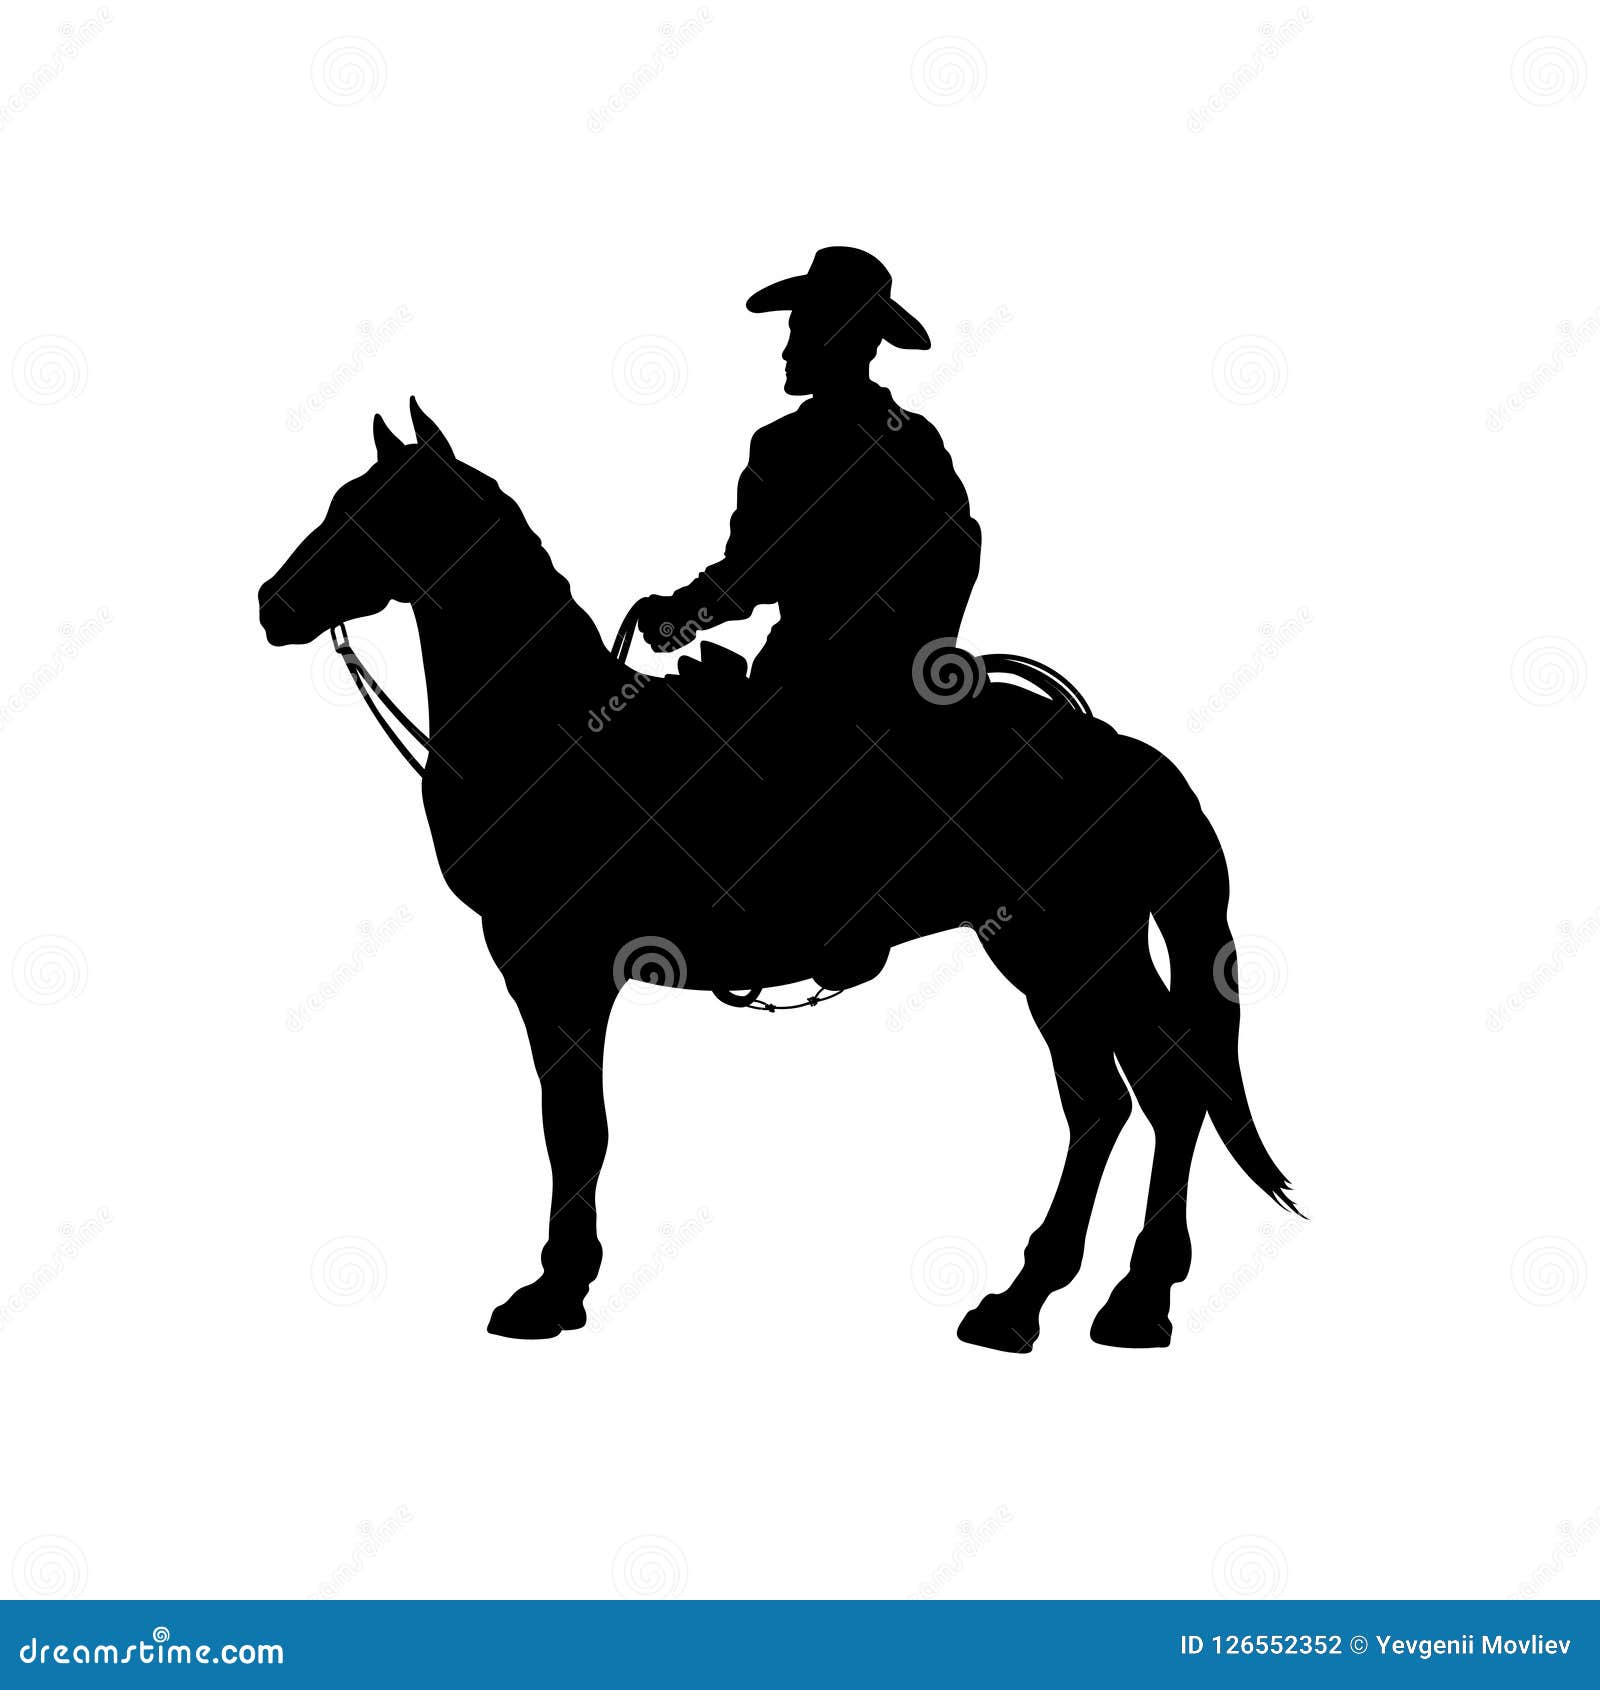 black silhouette of cowboy on horse.  image of american rider. western landscape